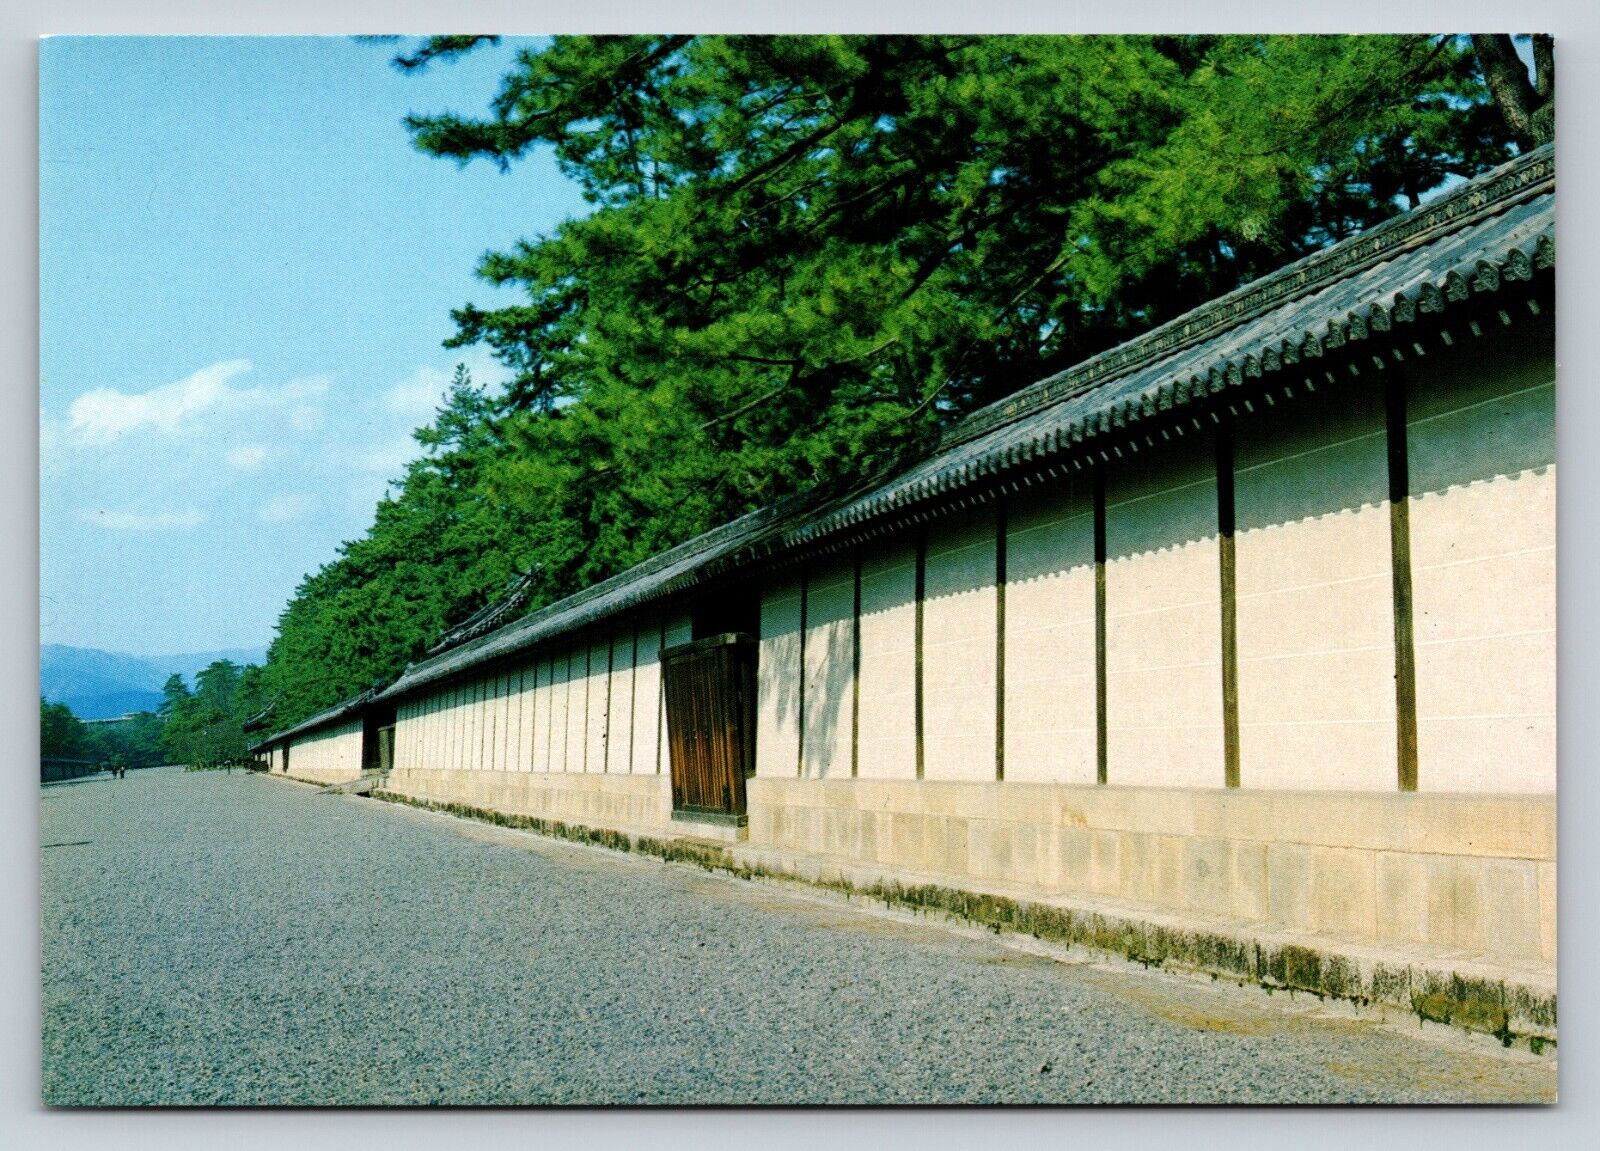 Kyoto Imperial Palace Japan 4x6